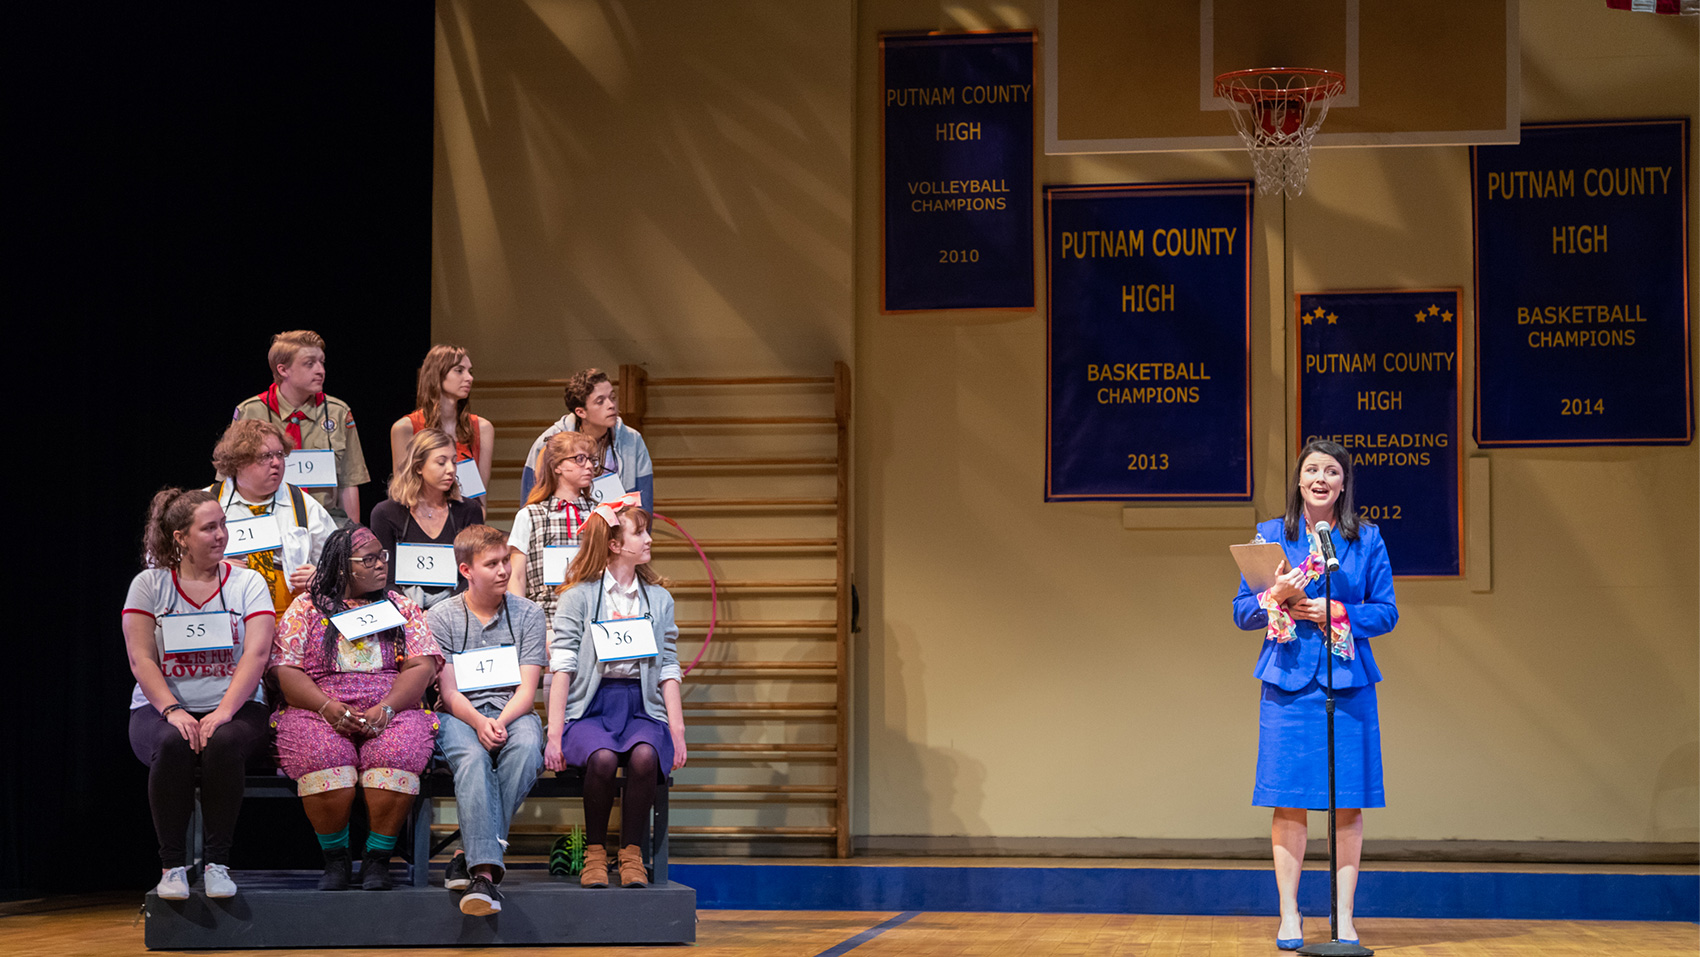 The host for the spelling bee contest stands in the middle of the stage (designed to look like a school gym with a basketball hoop mounted at the top and assorted wall hangings saying "Putnam County High") and speaks through a microphone. The contestants sit on bleachers to the side.